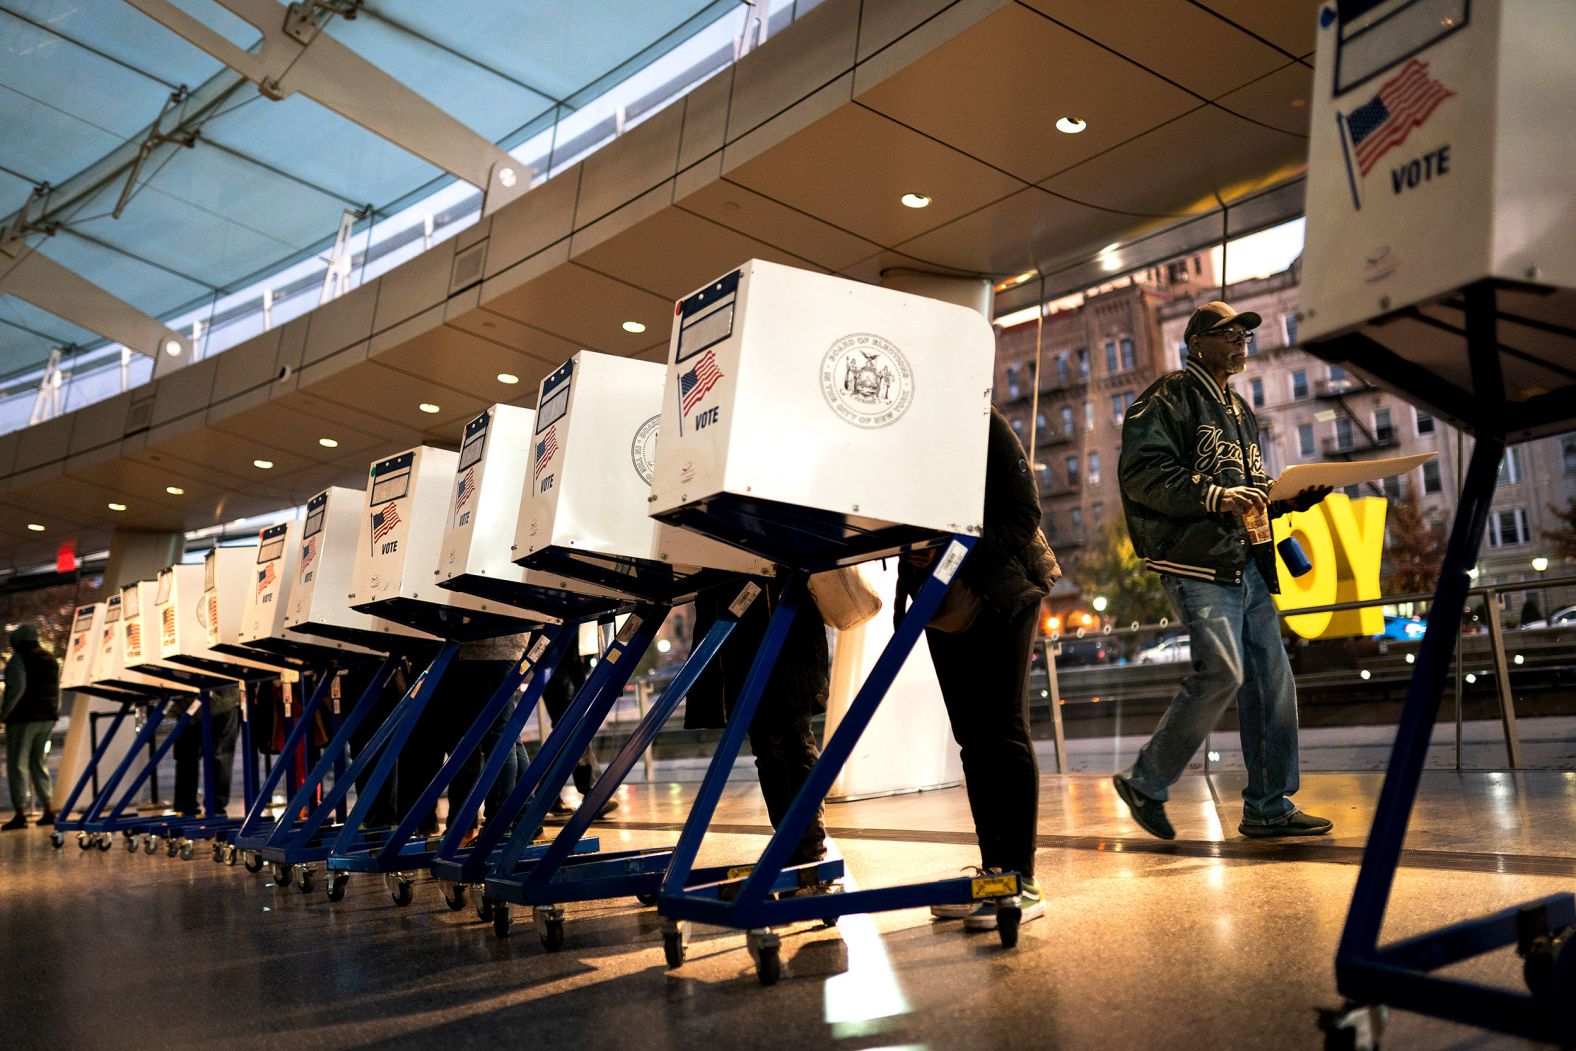 The first voters of the day begin filling out their ballots at the Brooklyn Museum in New York.